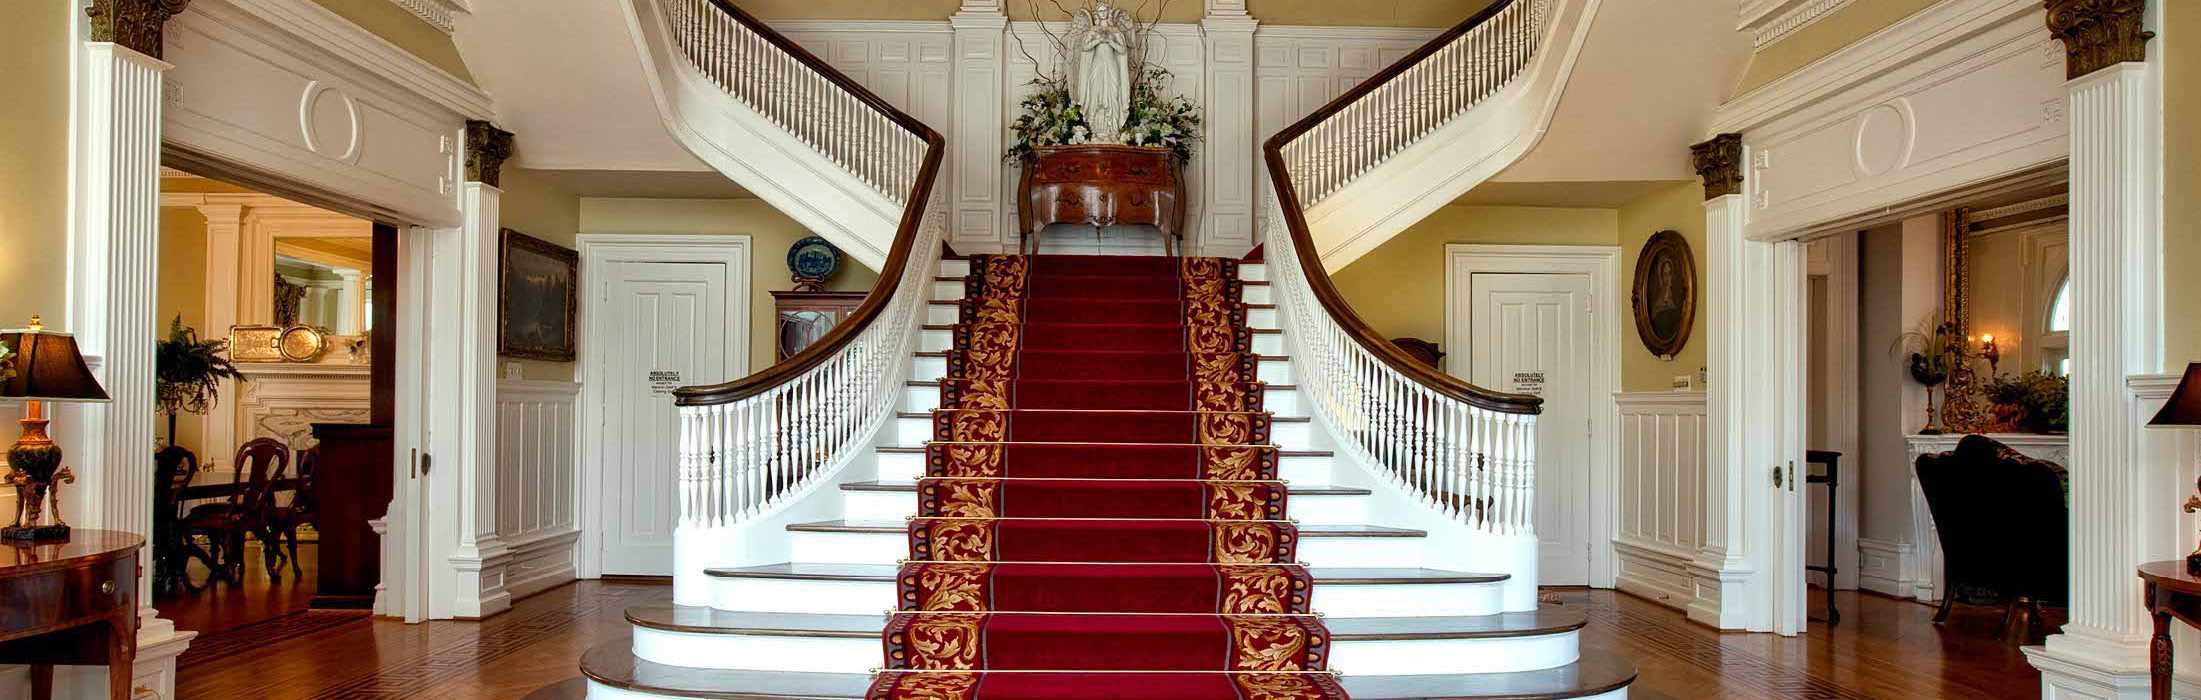 Image: grand staircase